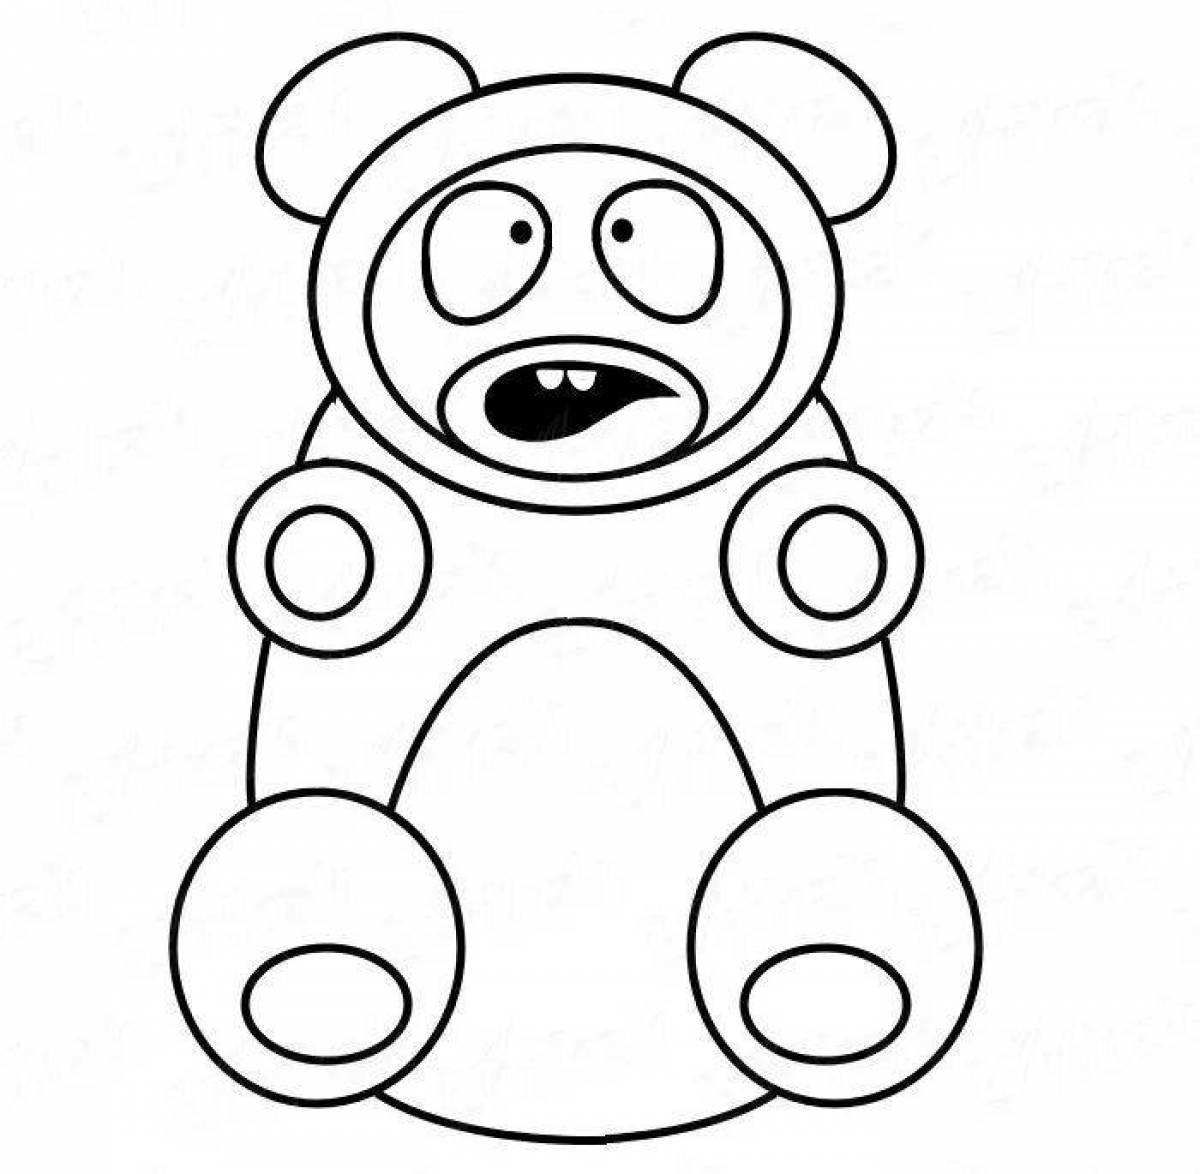 Exciting gummy bear coloring pages